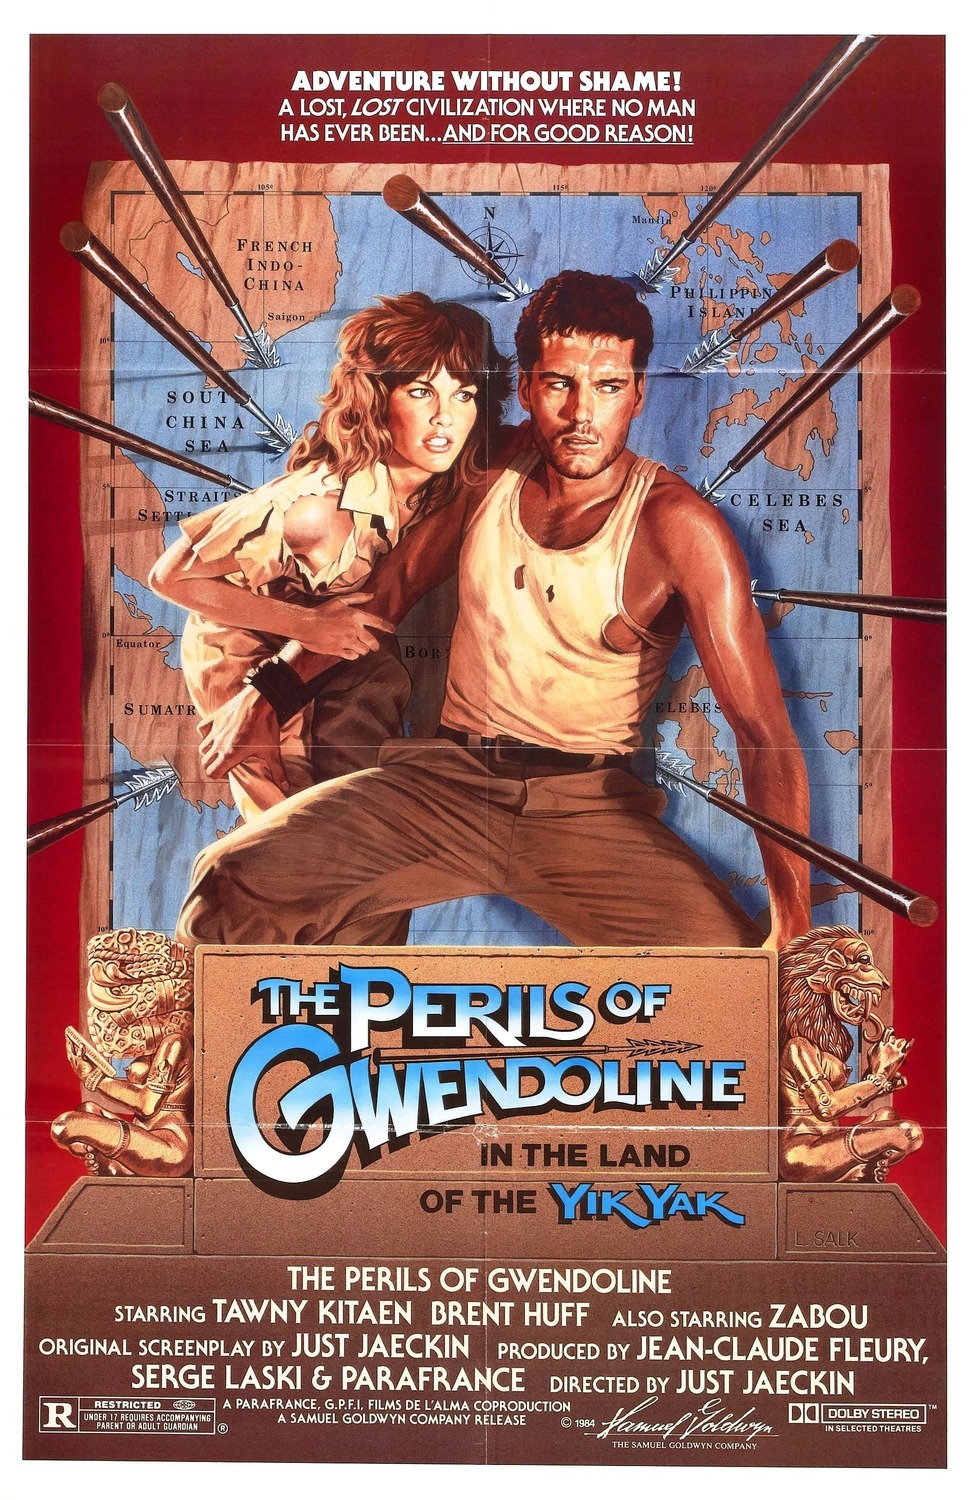 Extra Large Movie Poster Image for The Perils of Gwendoline in the Land of the Yik Yak 